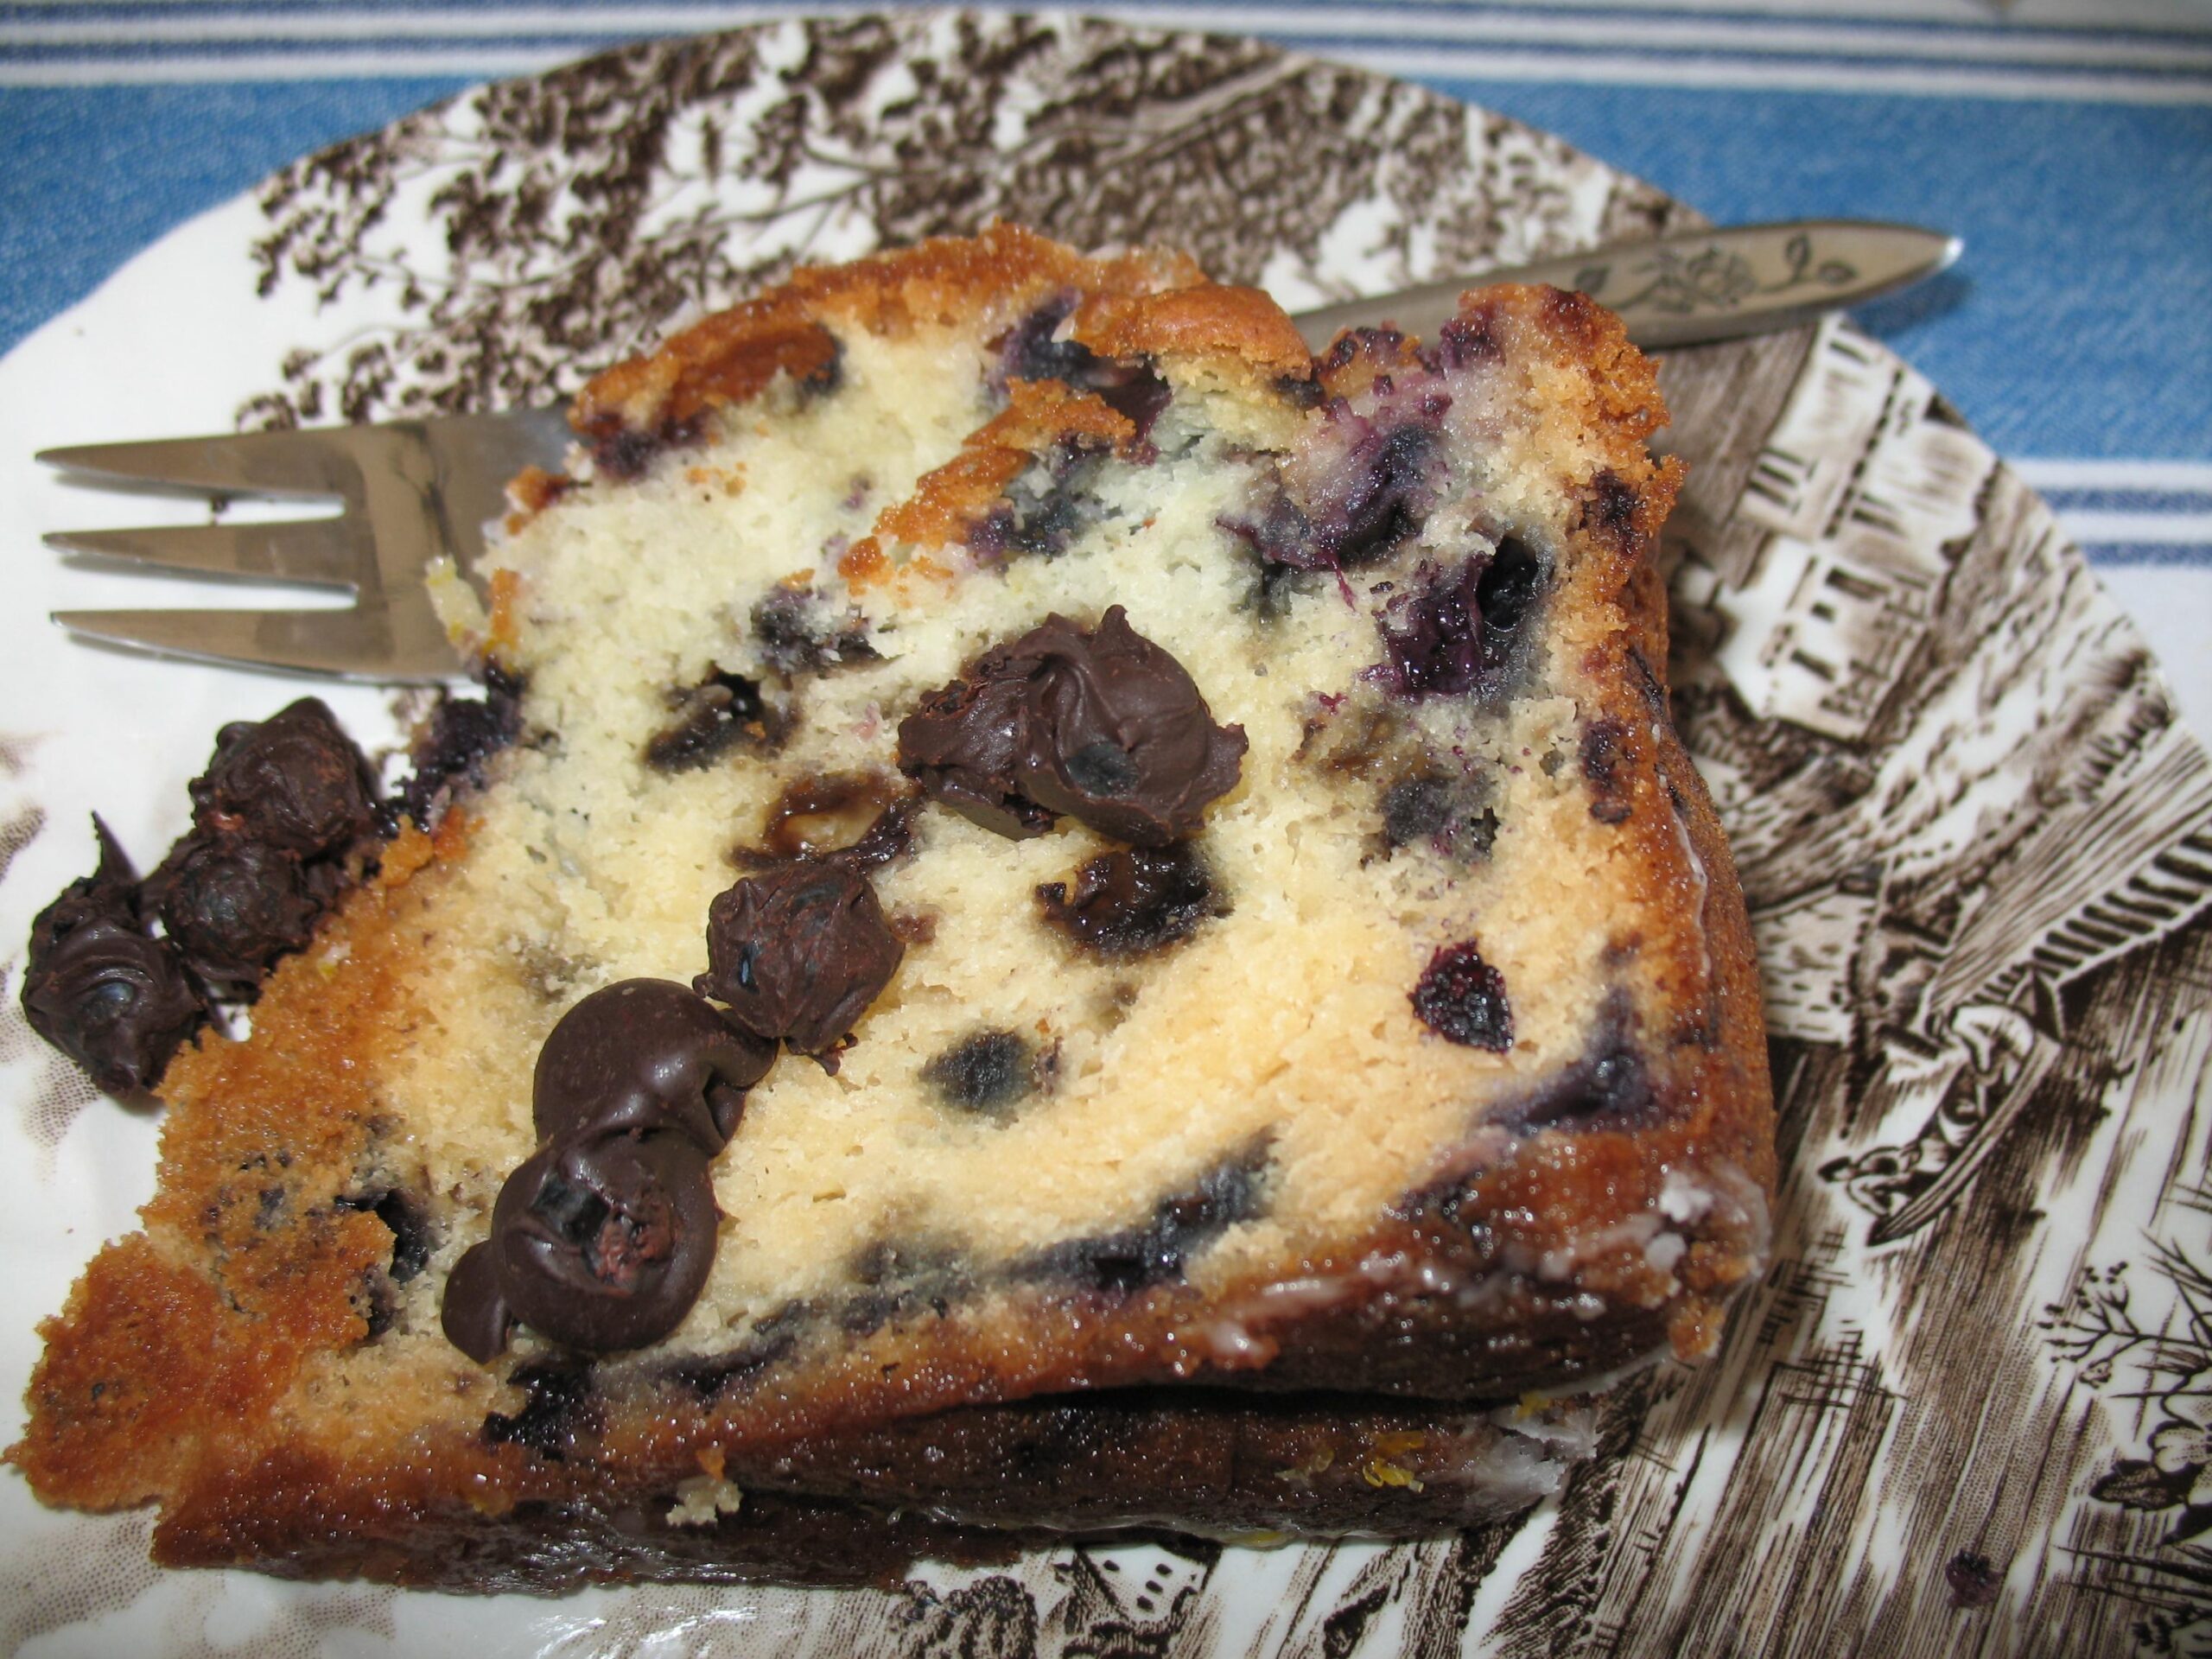  Bursting with juicy blueberries in every bite